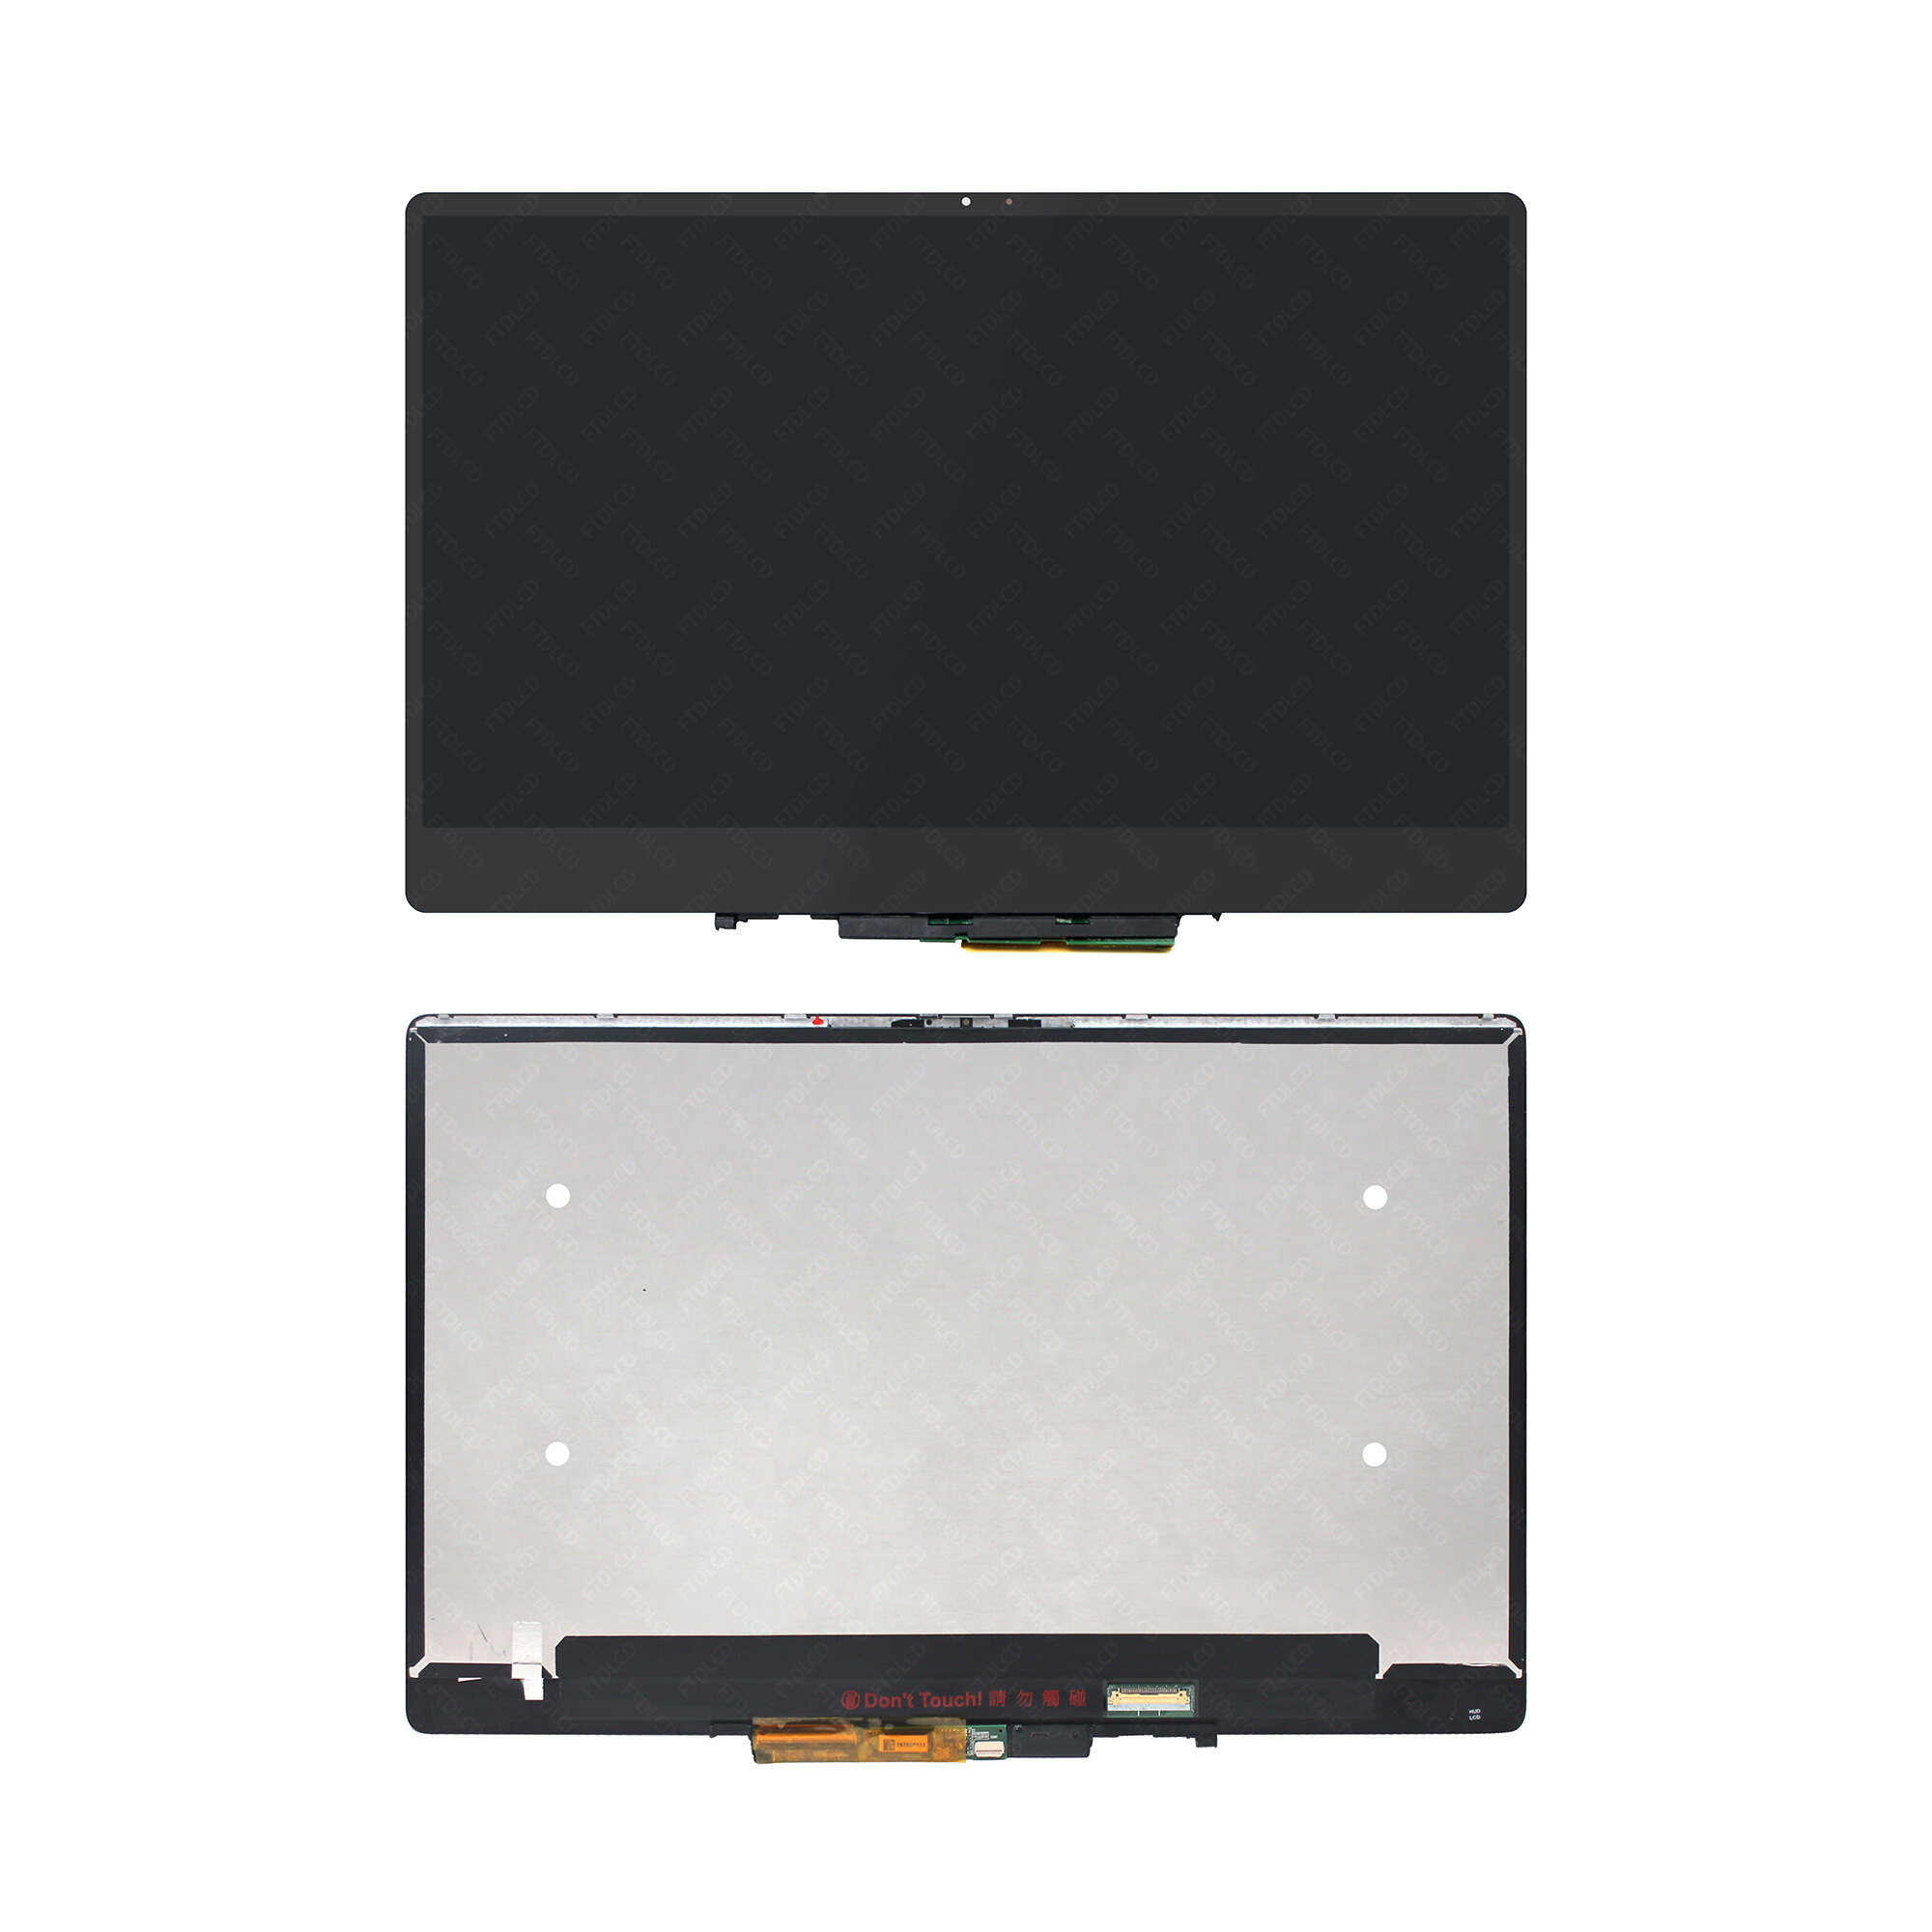 Kreplacement Replacement 13.3 inches UHD 4K IPS LCD Display Touch Screen Digitizer Assembly Bezel with Touch Controller Board for Dell Inspiron 13 7386 i7386 P91G P91G001 (3840x2160 - EDP 40Pins)